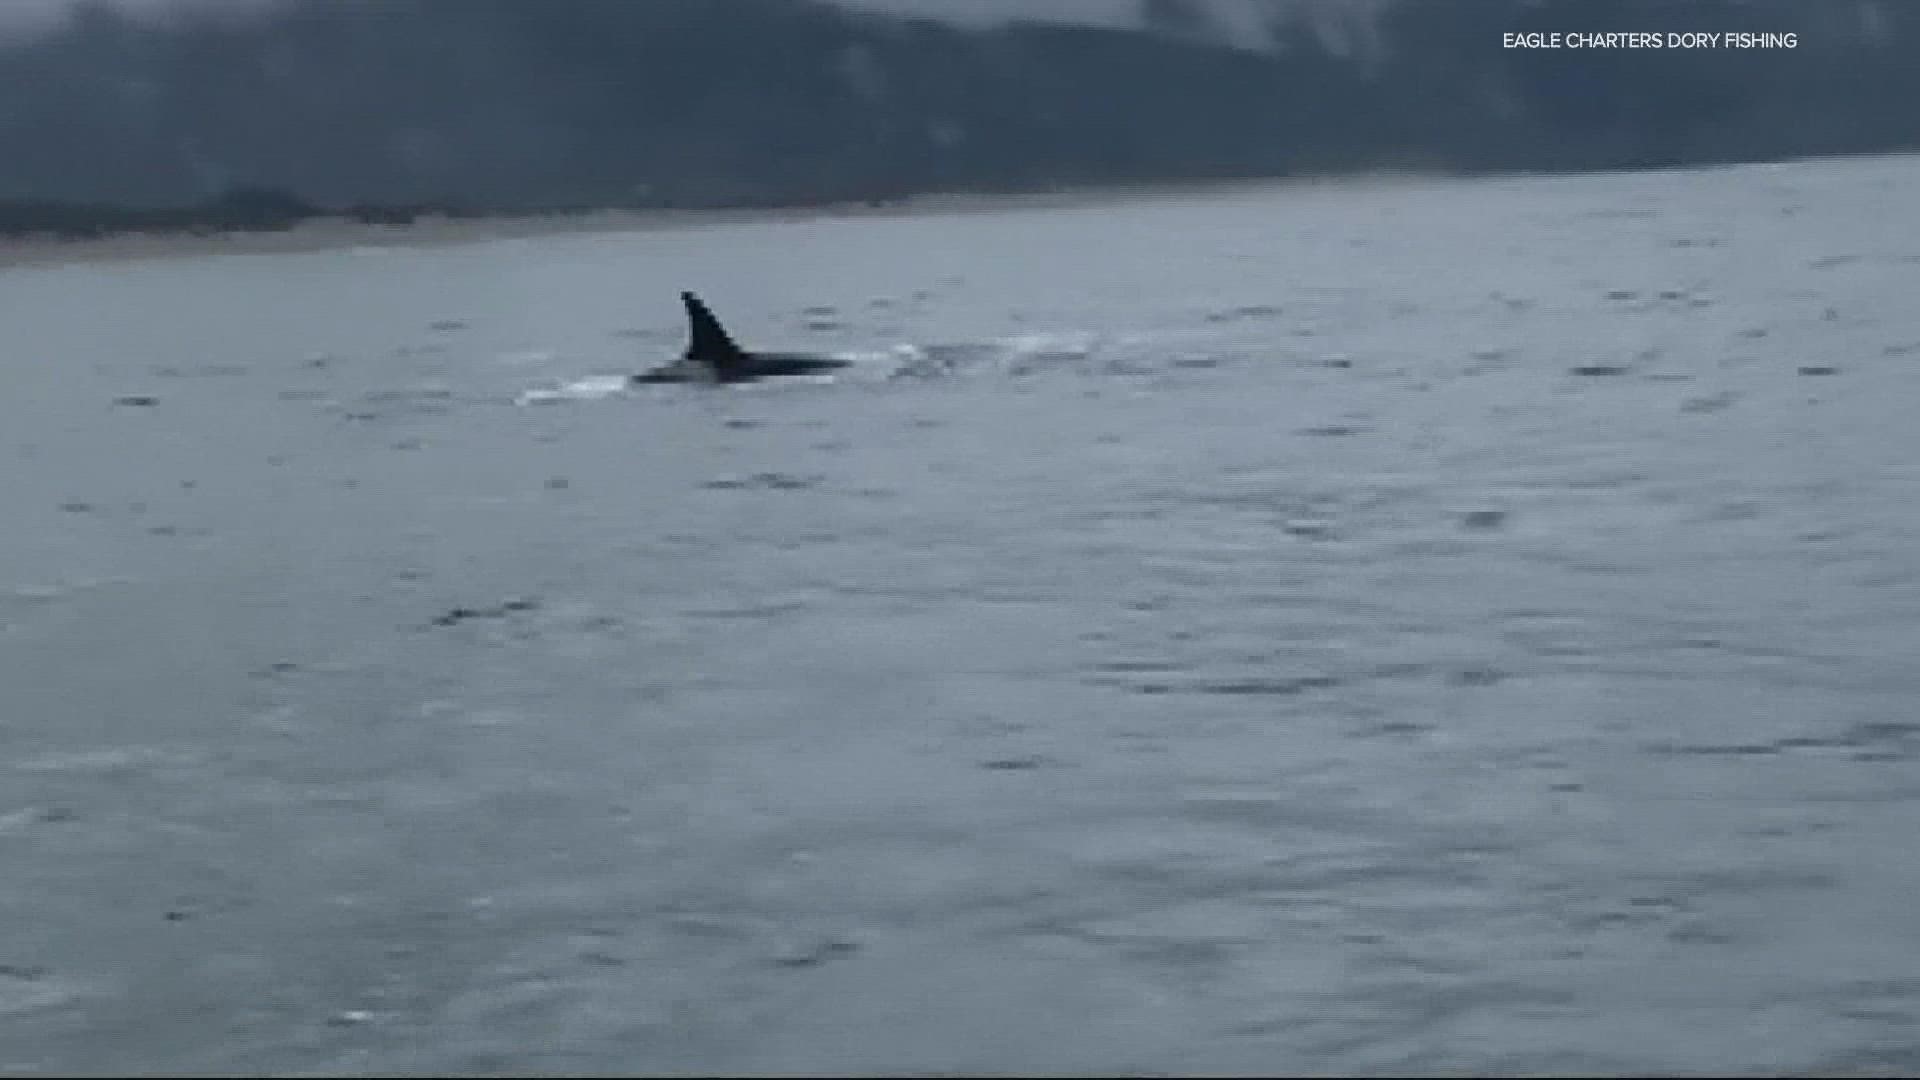 Dan Rocha, who captured video of a pod of orcas, said one of the males started swimming in the direction of his boat and swam right underneath it.